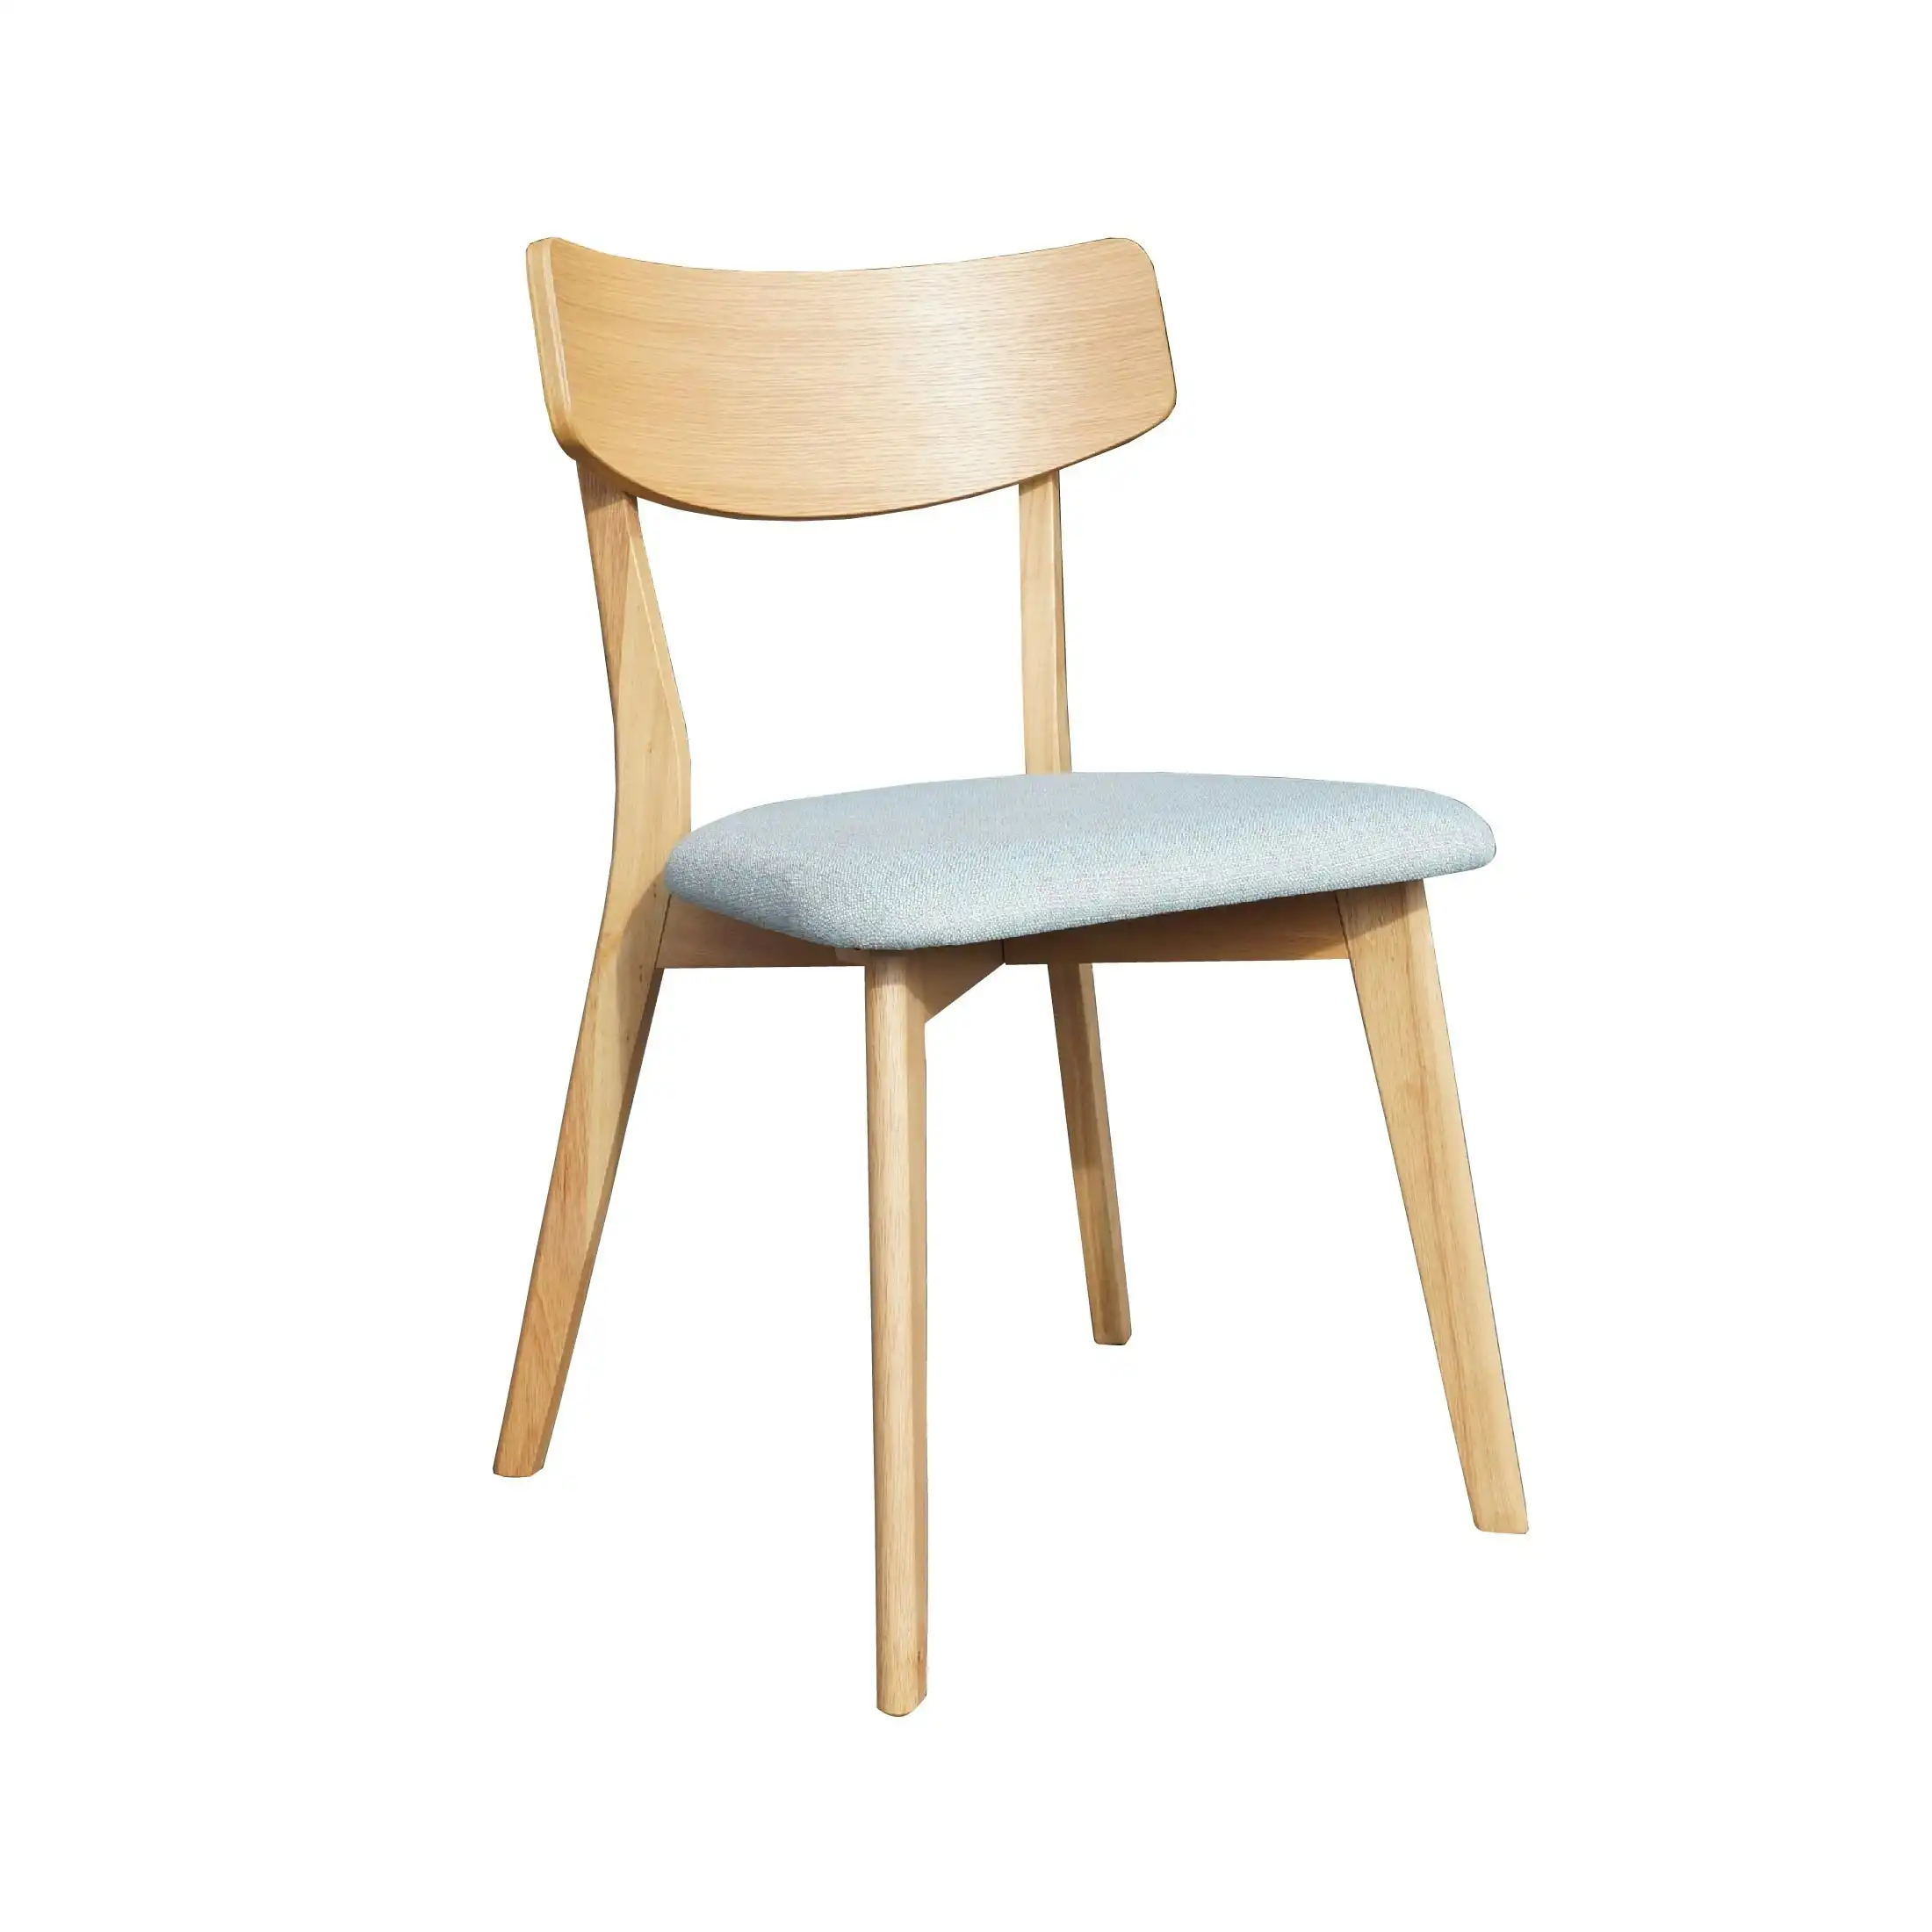 Oxley Dining Chair - Natural Oak with Mint Blue fabric